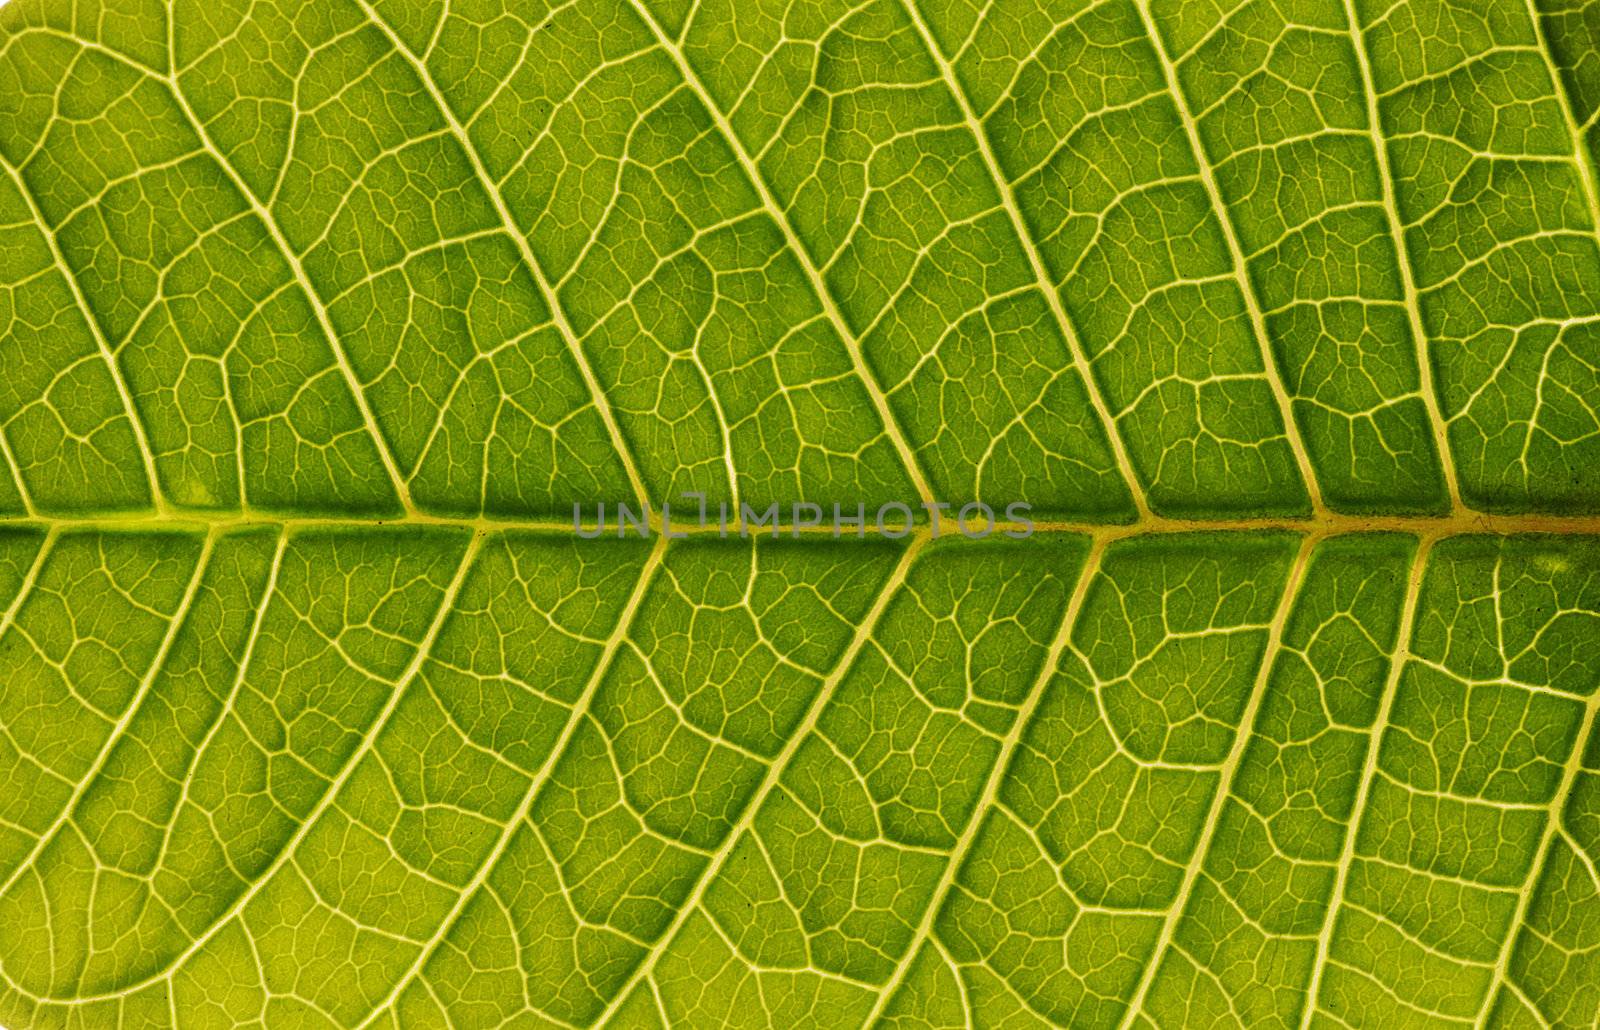 Leaf background by haveseen